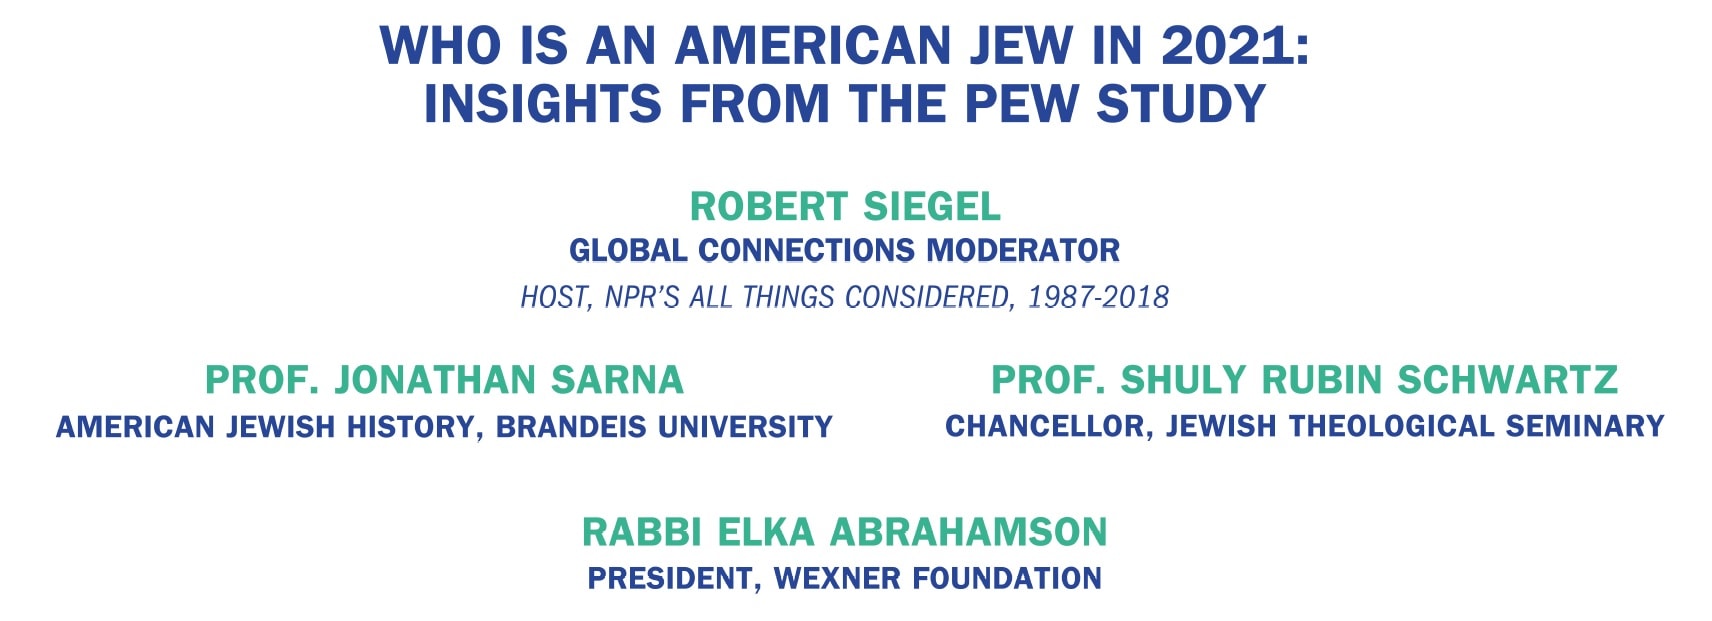 Global Connections: Who Is An American Jew In 2021: Insights From The Pew Study